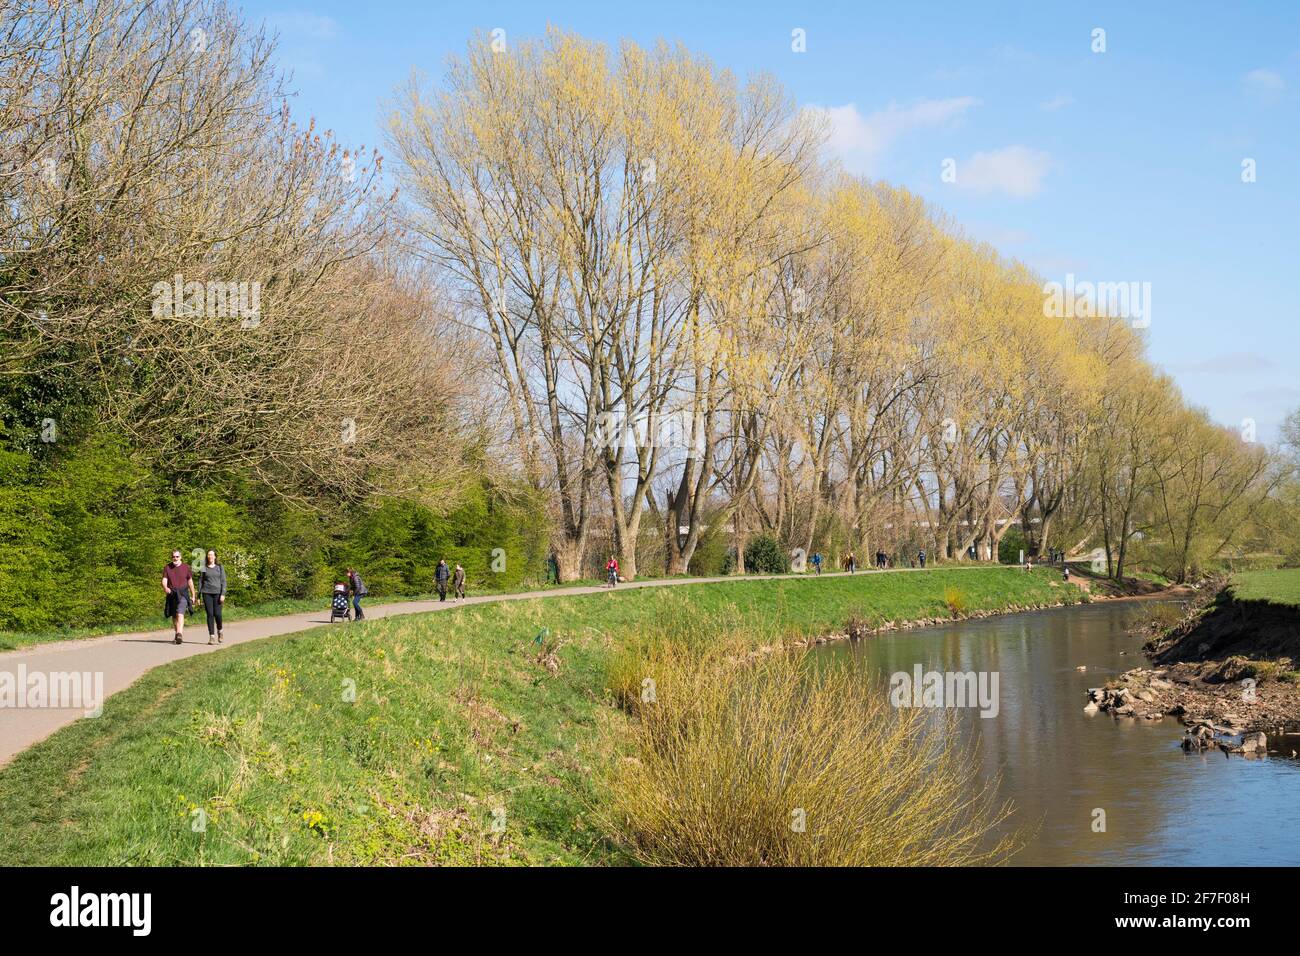 People walking along the riverside path next to the river Mersey in Heaton Mersey, Greater Manchester, England, UK Stock Photo